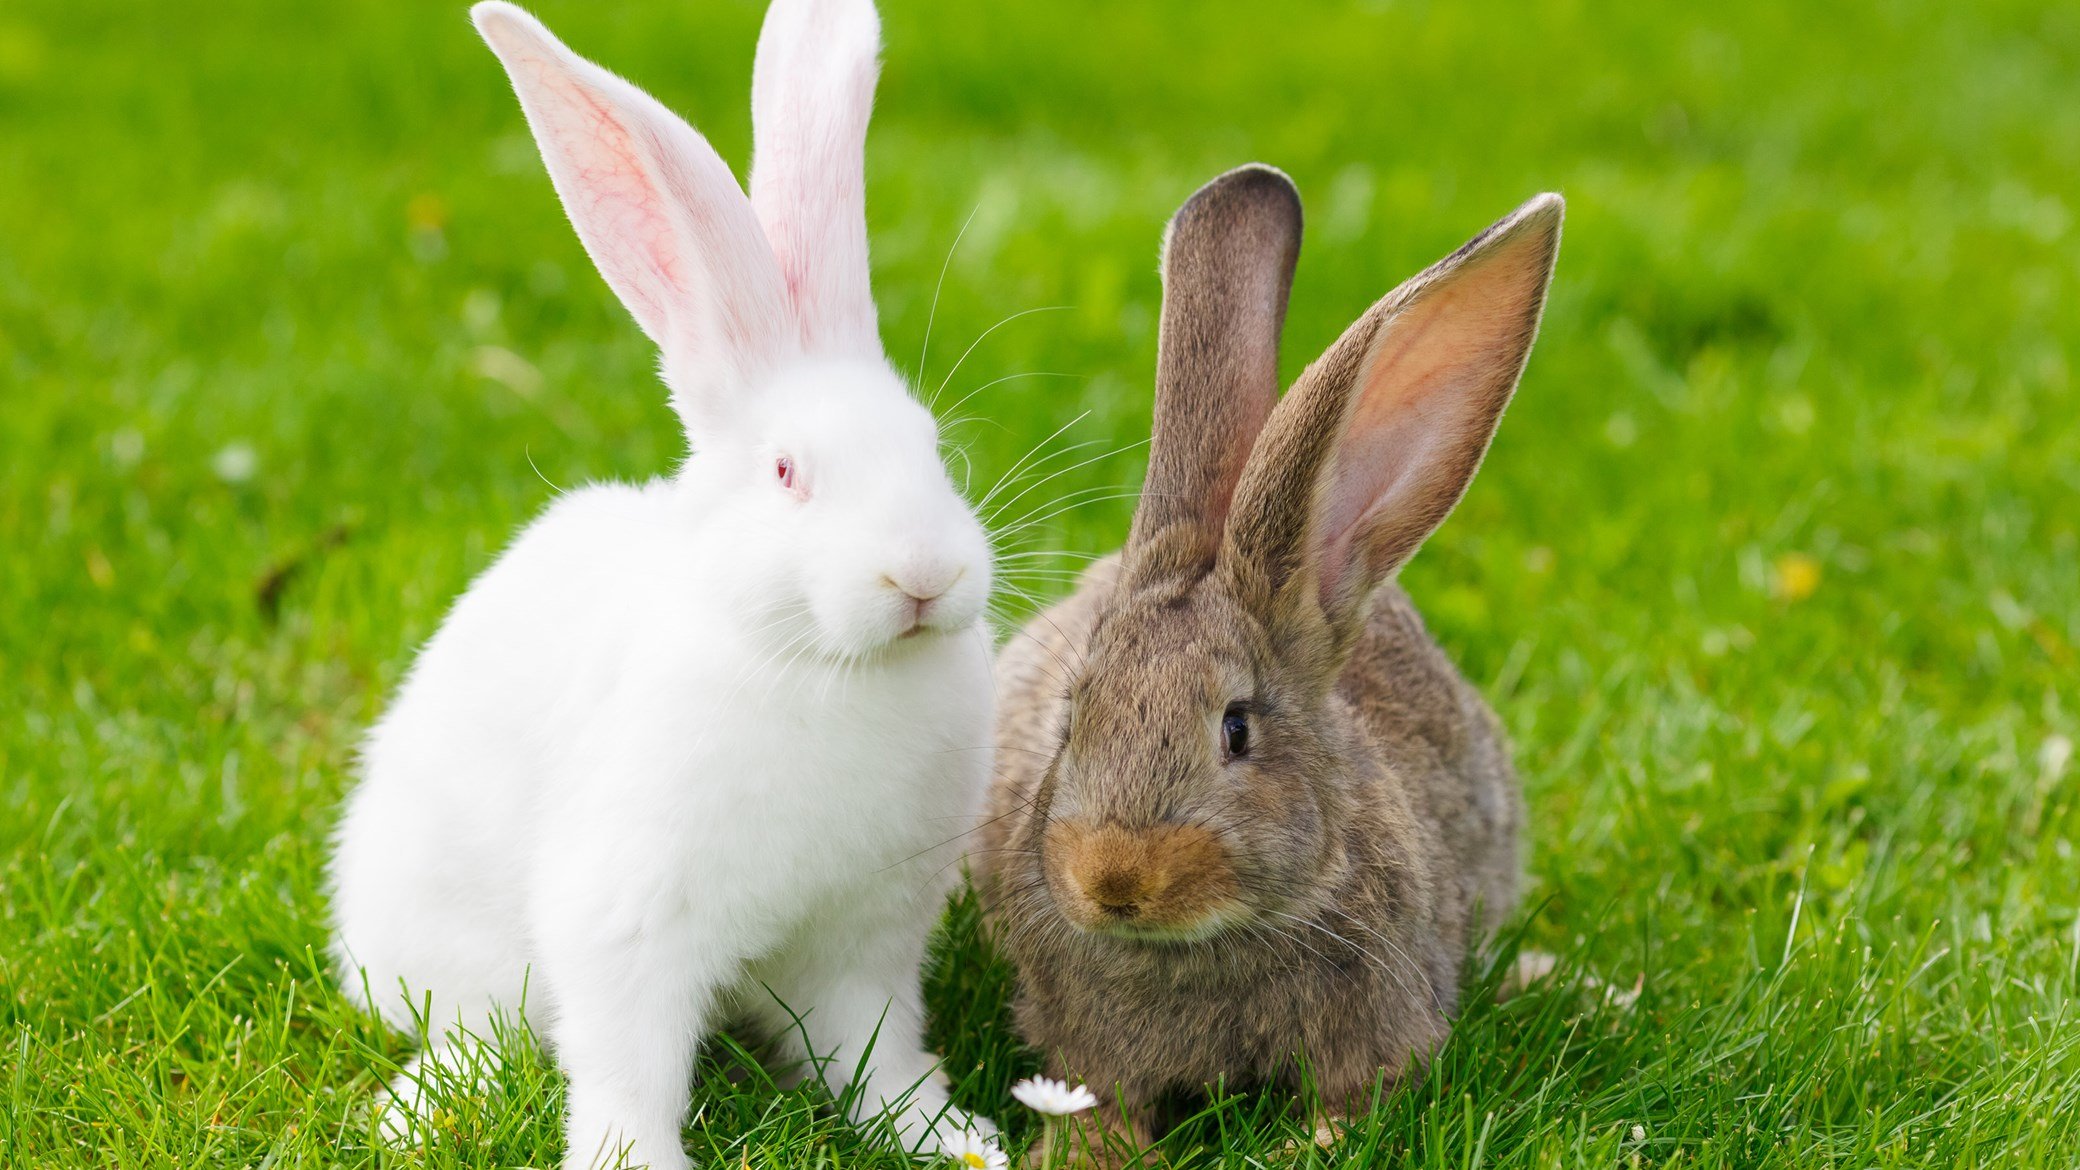 The 10 Famous Rabbits You Have to Meet in This Lifetime | Here Bunny